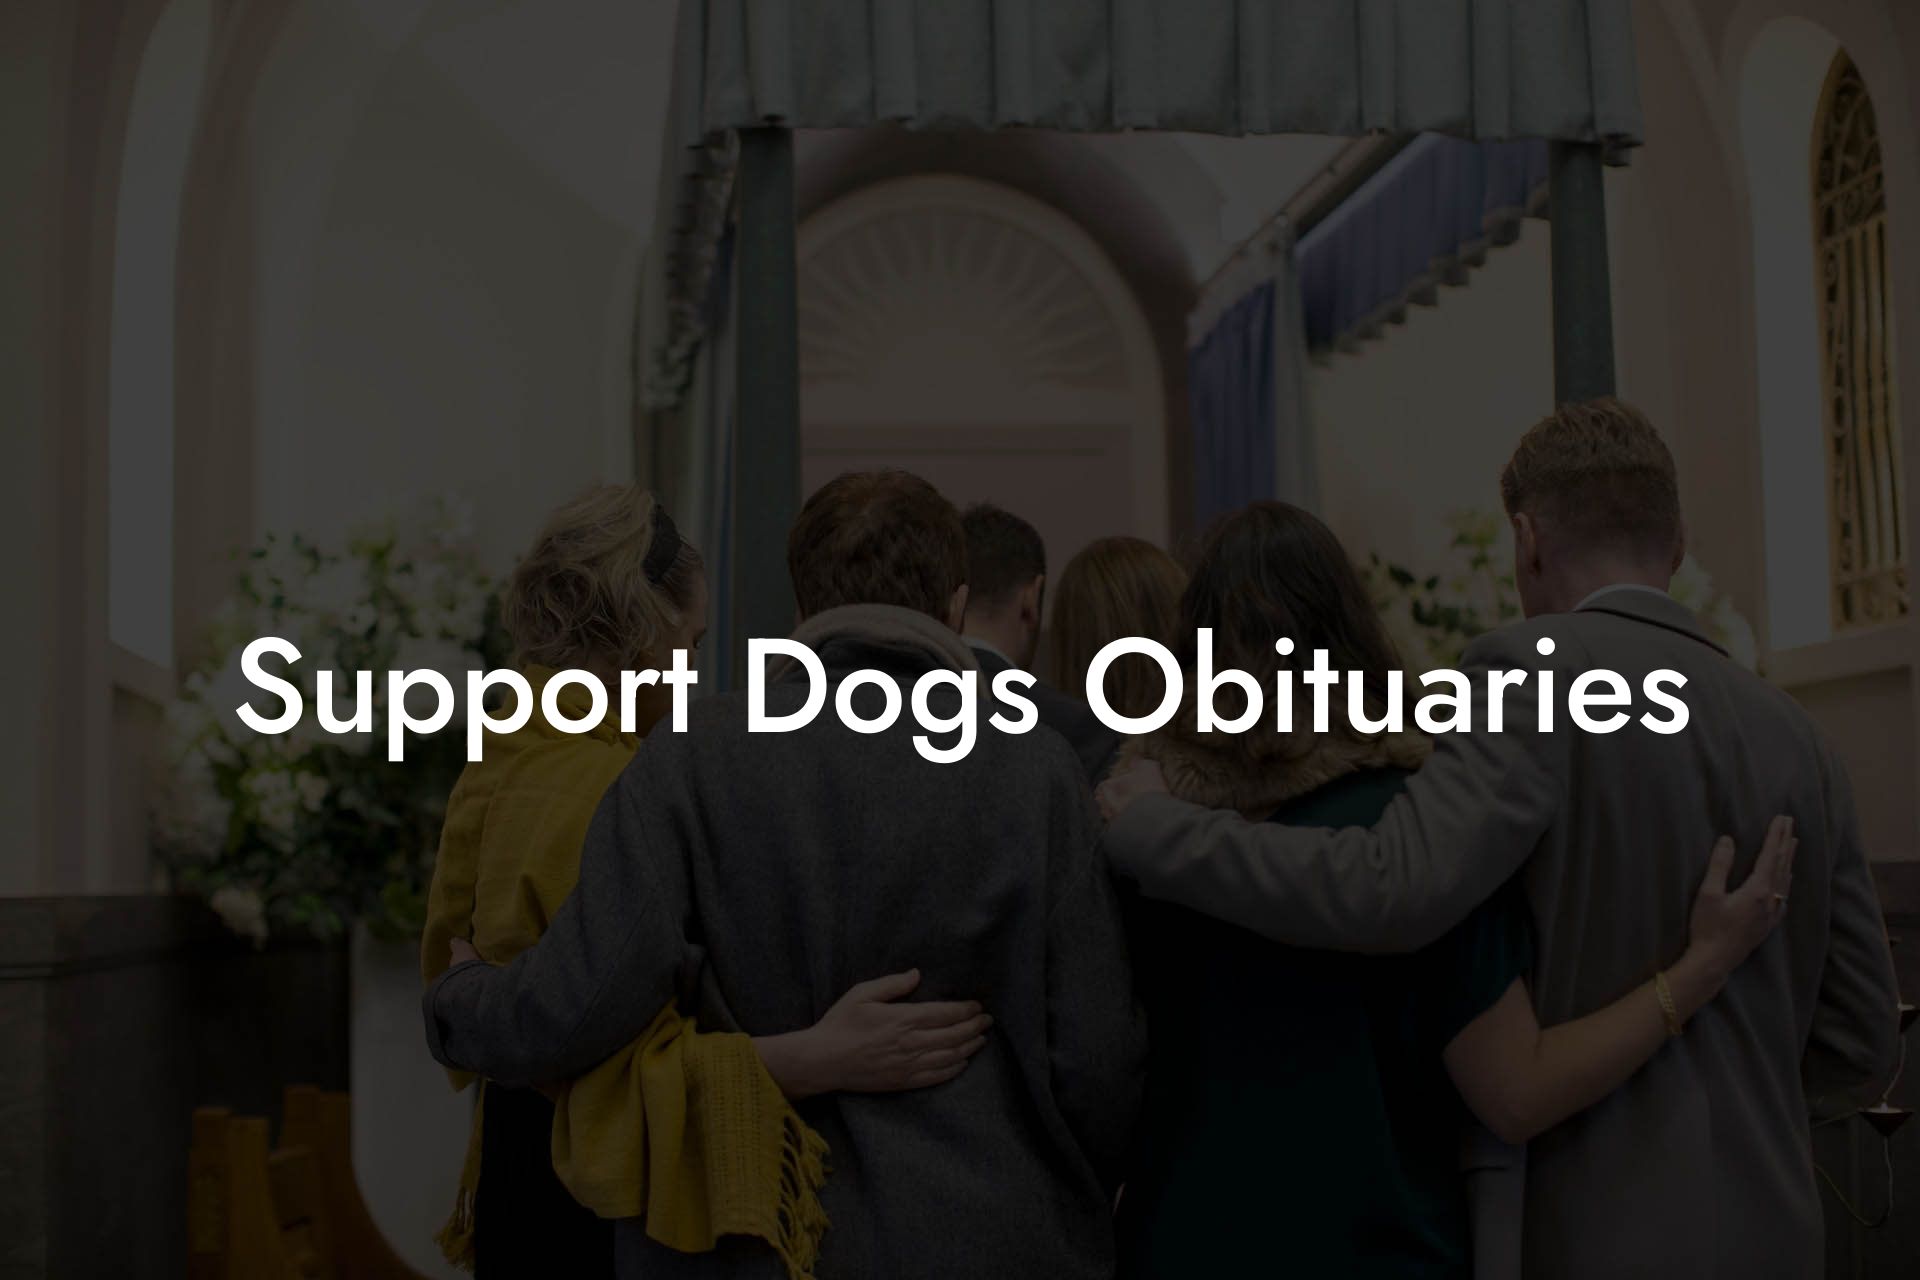 Support Dogs Obituaries